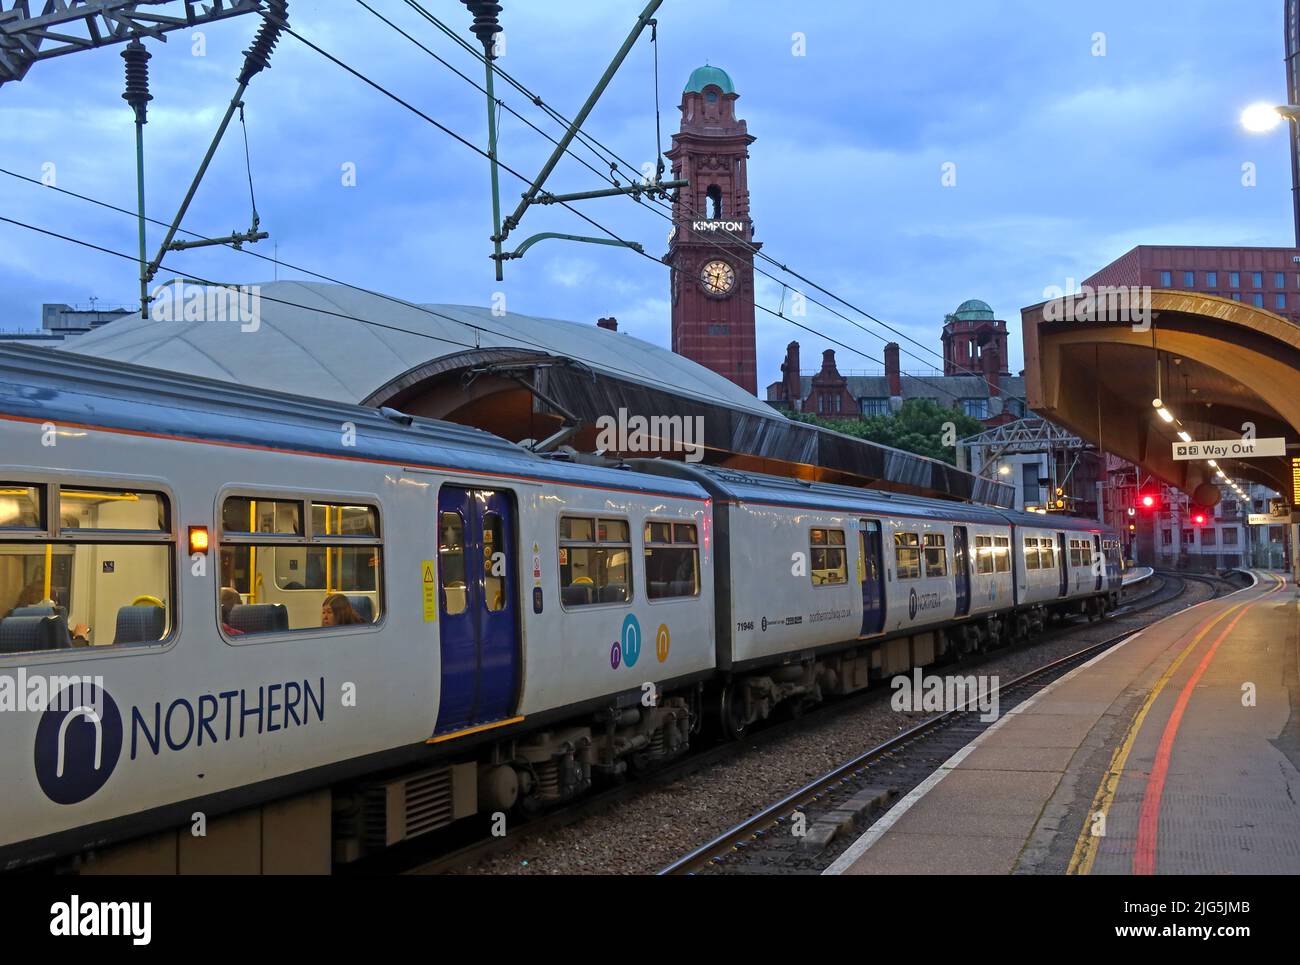 Northern railway EMU train, at Oxford Road railway station, Manchester, Station Approach, Oxford Rd, Manchester, England, UK, M1 6FU Stock Photo